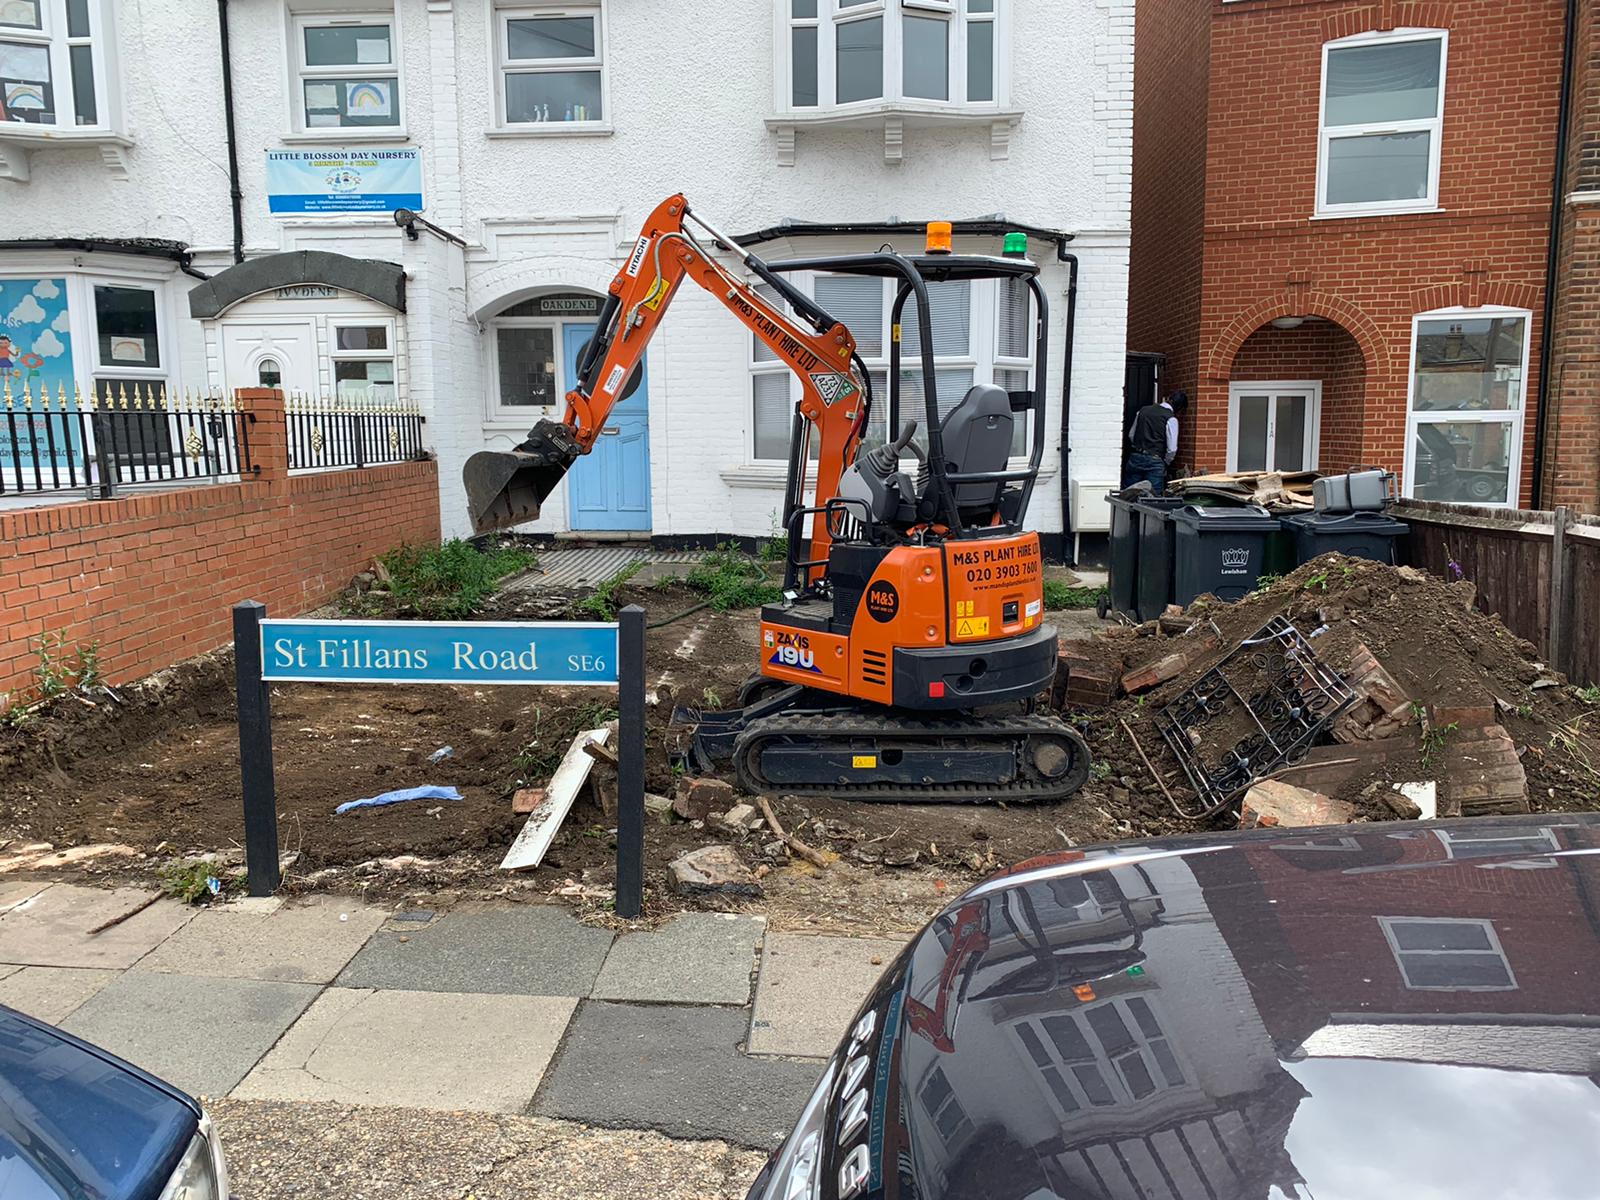 Plant Hire company in Ealing